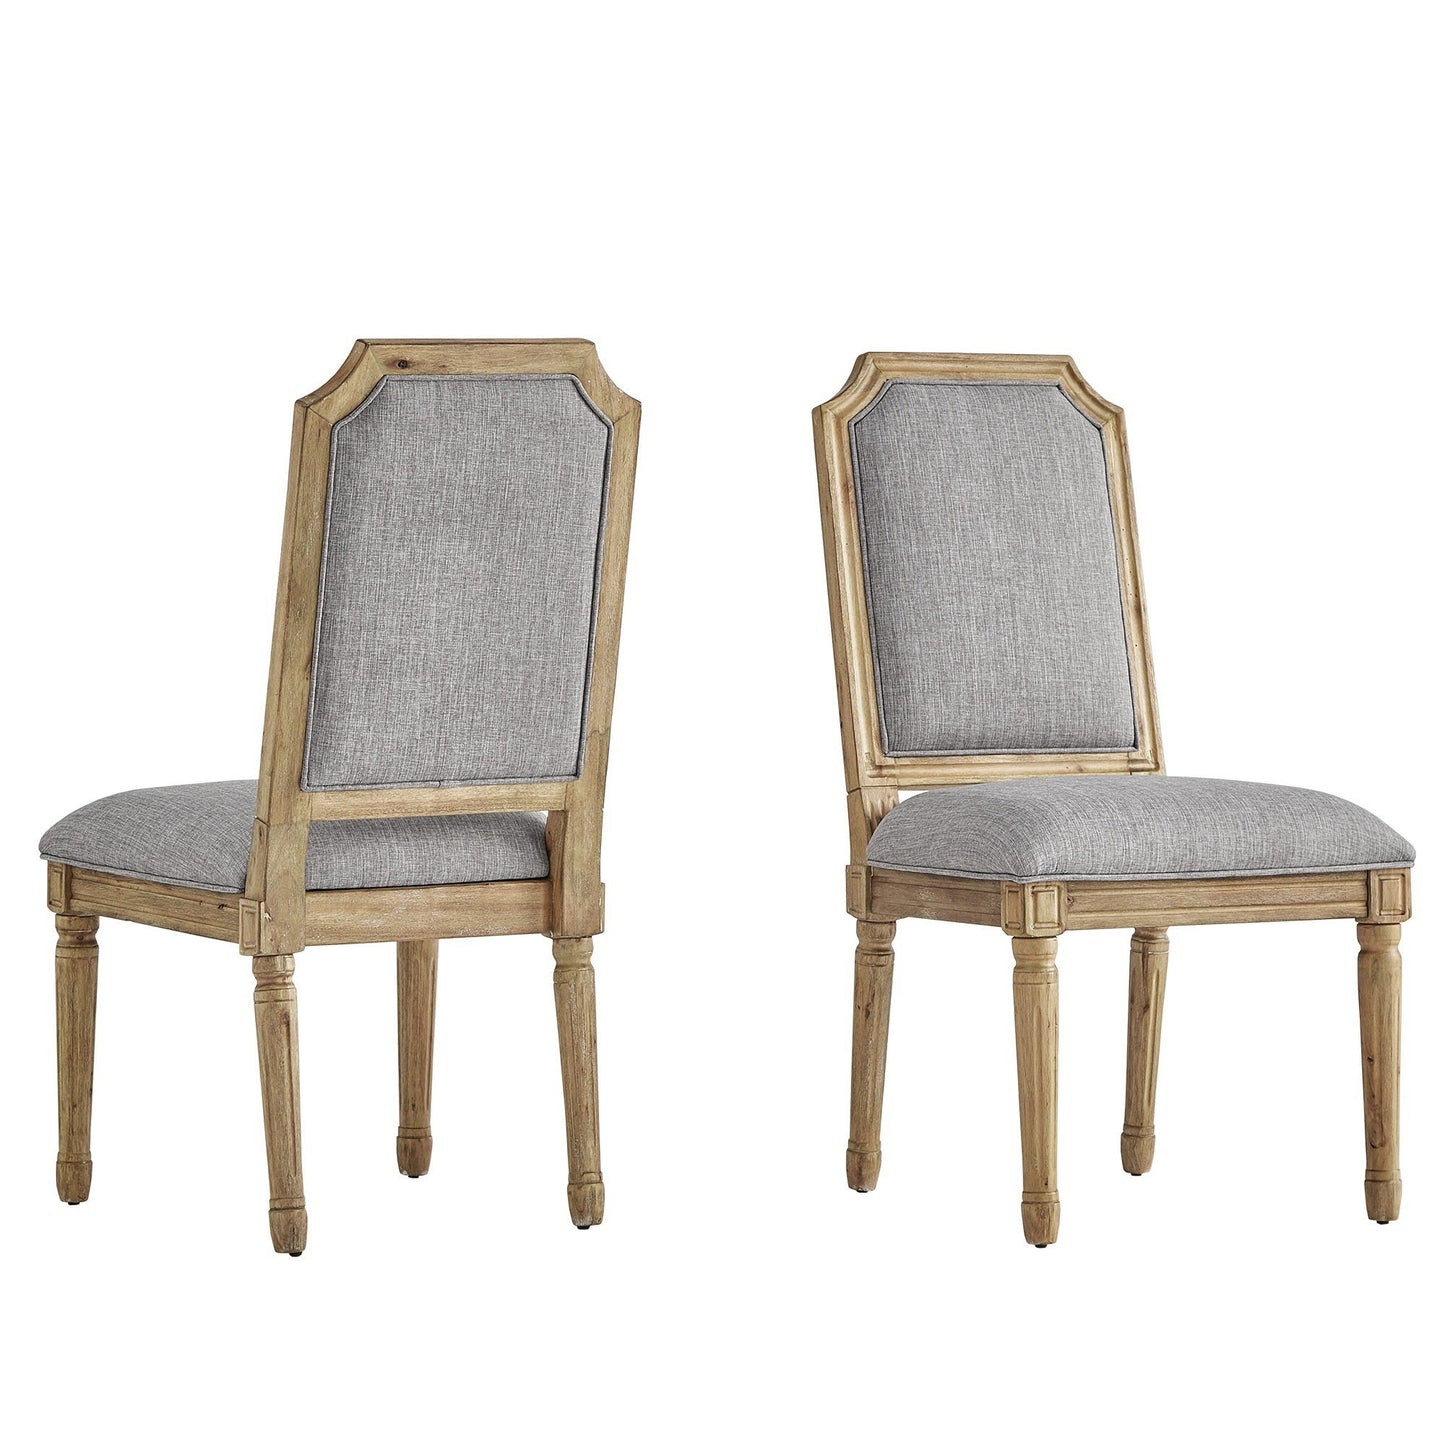 Arched Linen and Wood Dining Chairs (Set of 2) - Grey Linen, Natural Finish